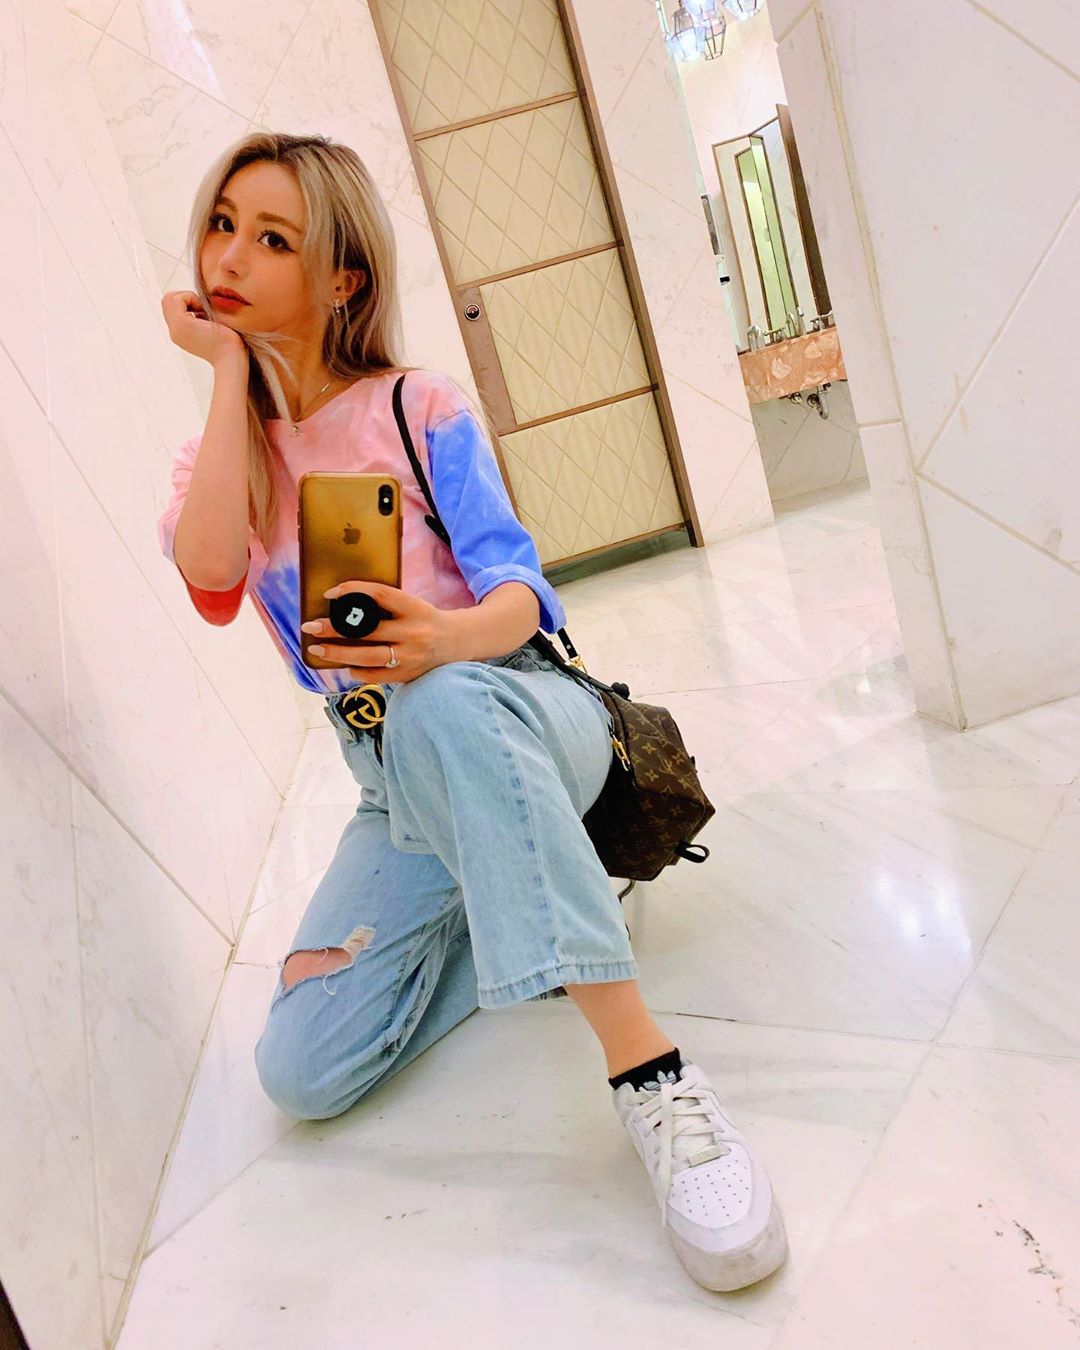 51 Hot Pictures Of Wengie Are A Genuine Masterpiece 7